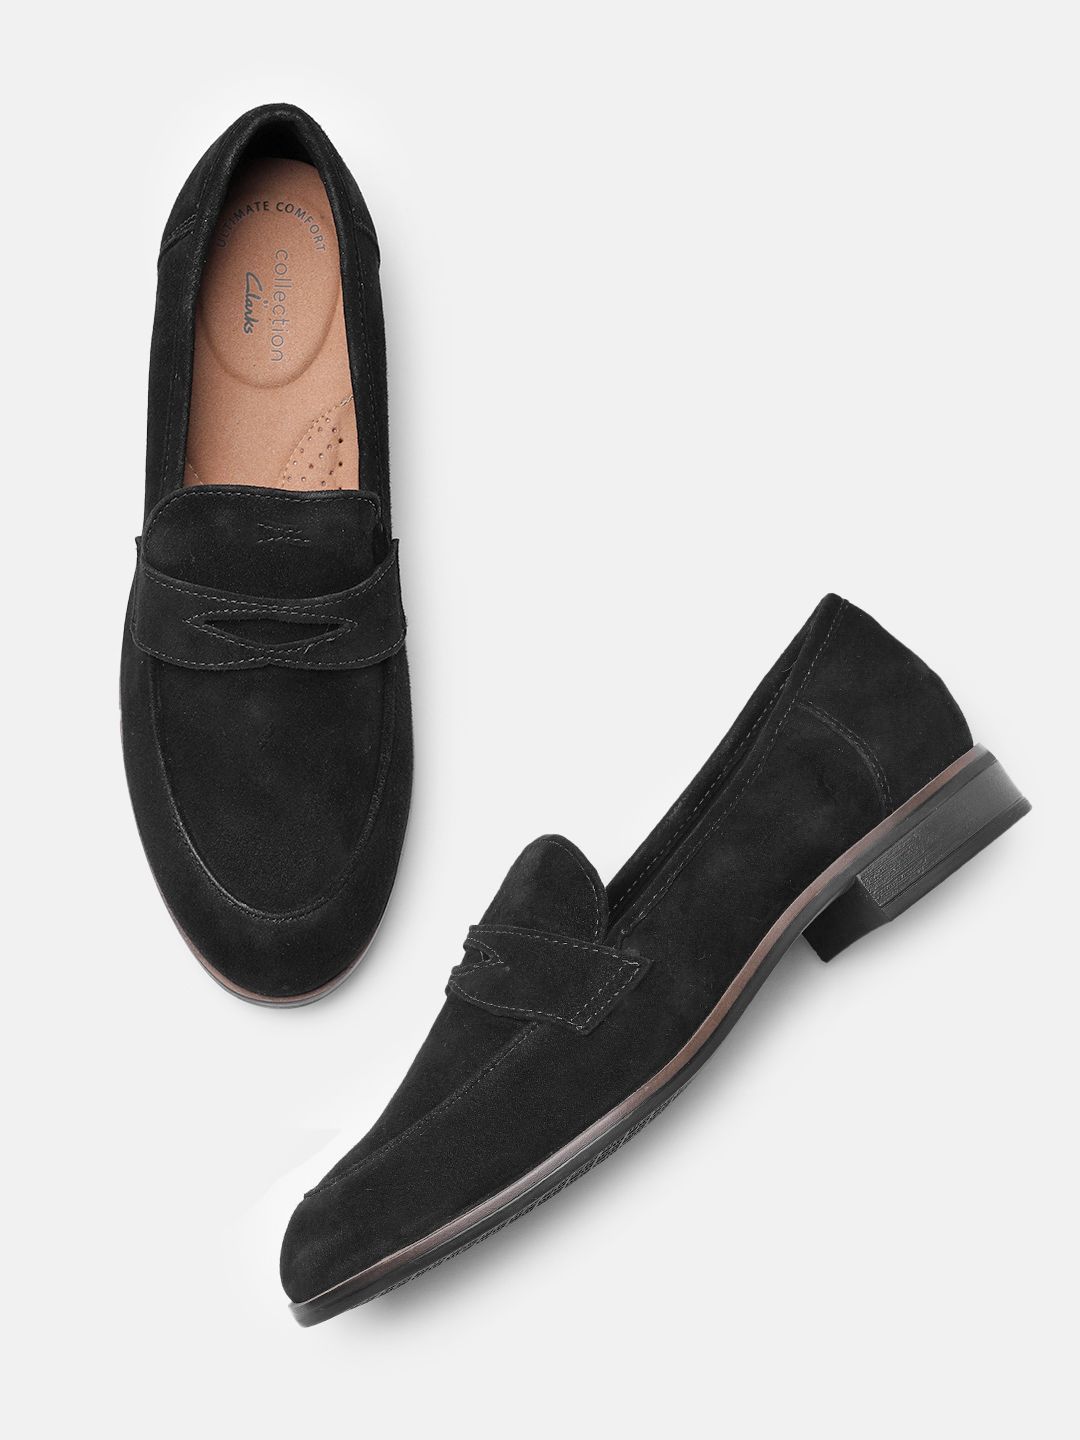 Clarks Women Black Suede Loafers Price in India